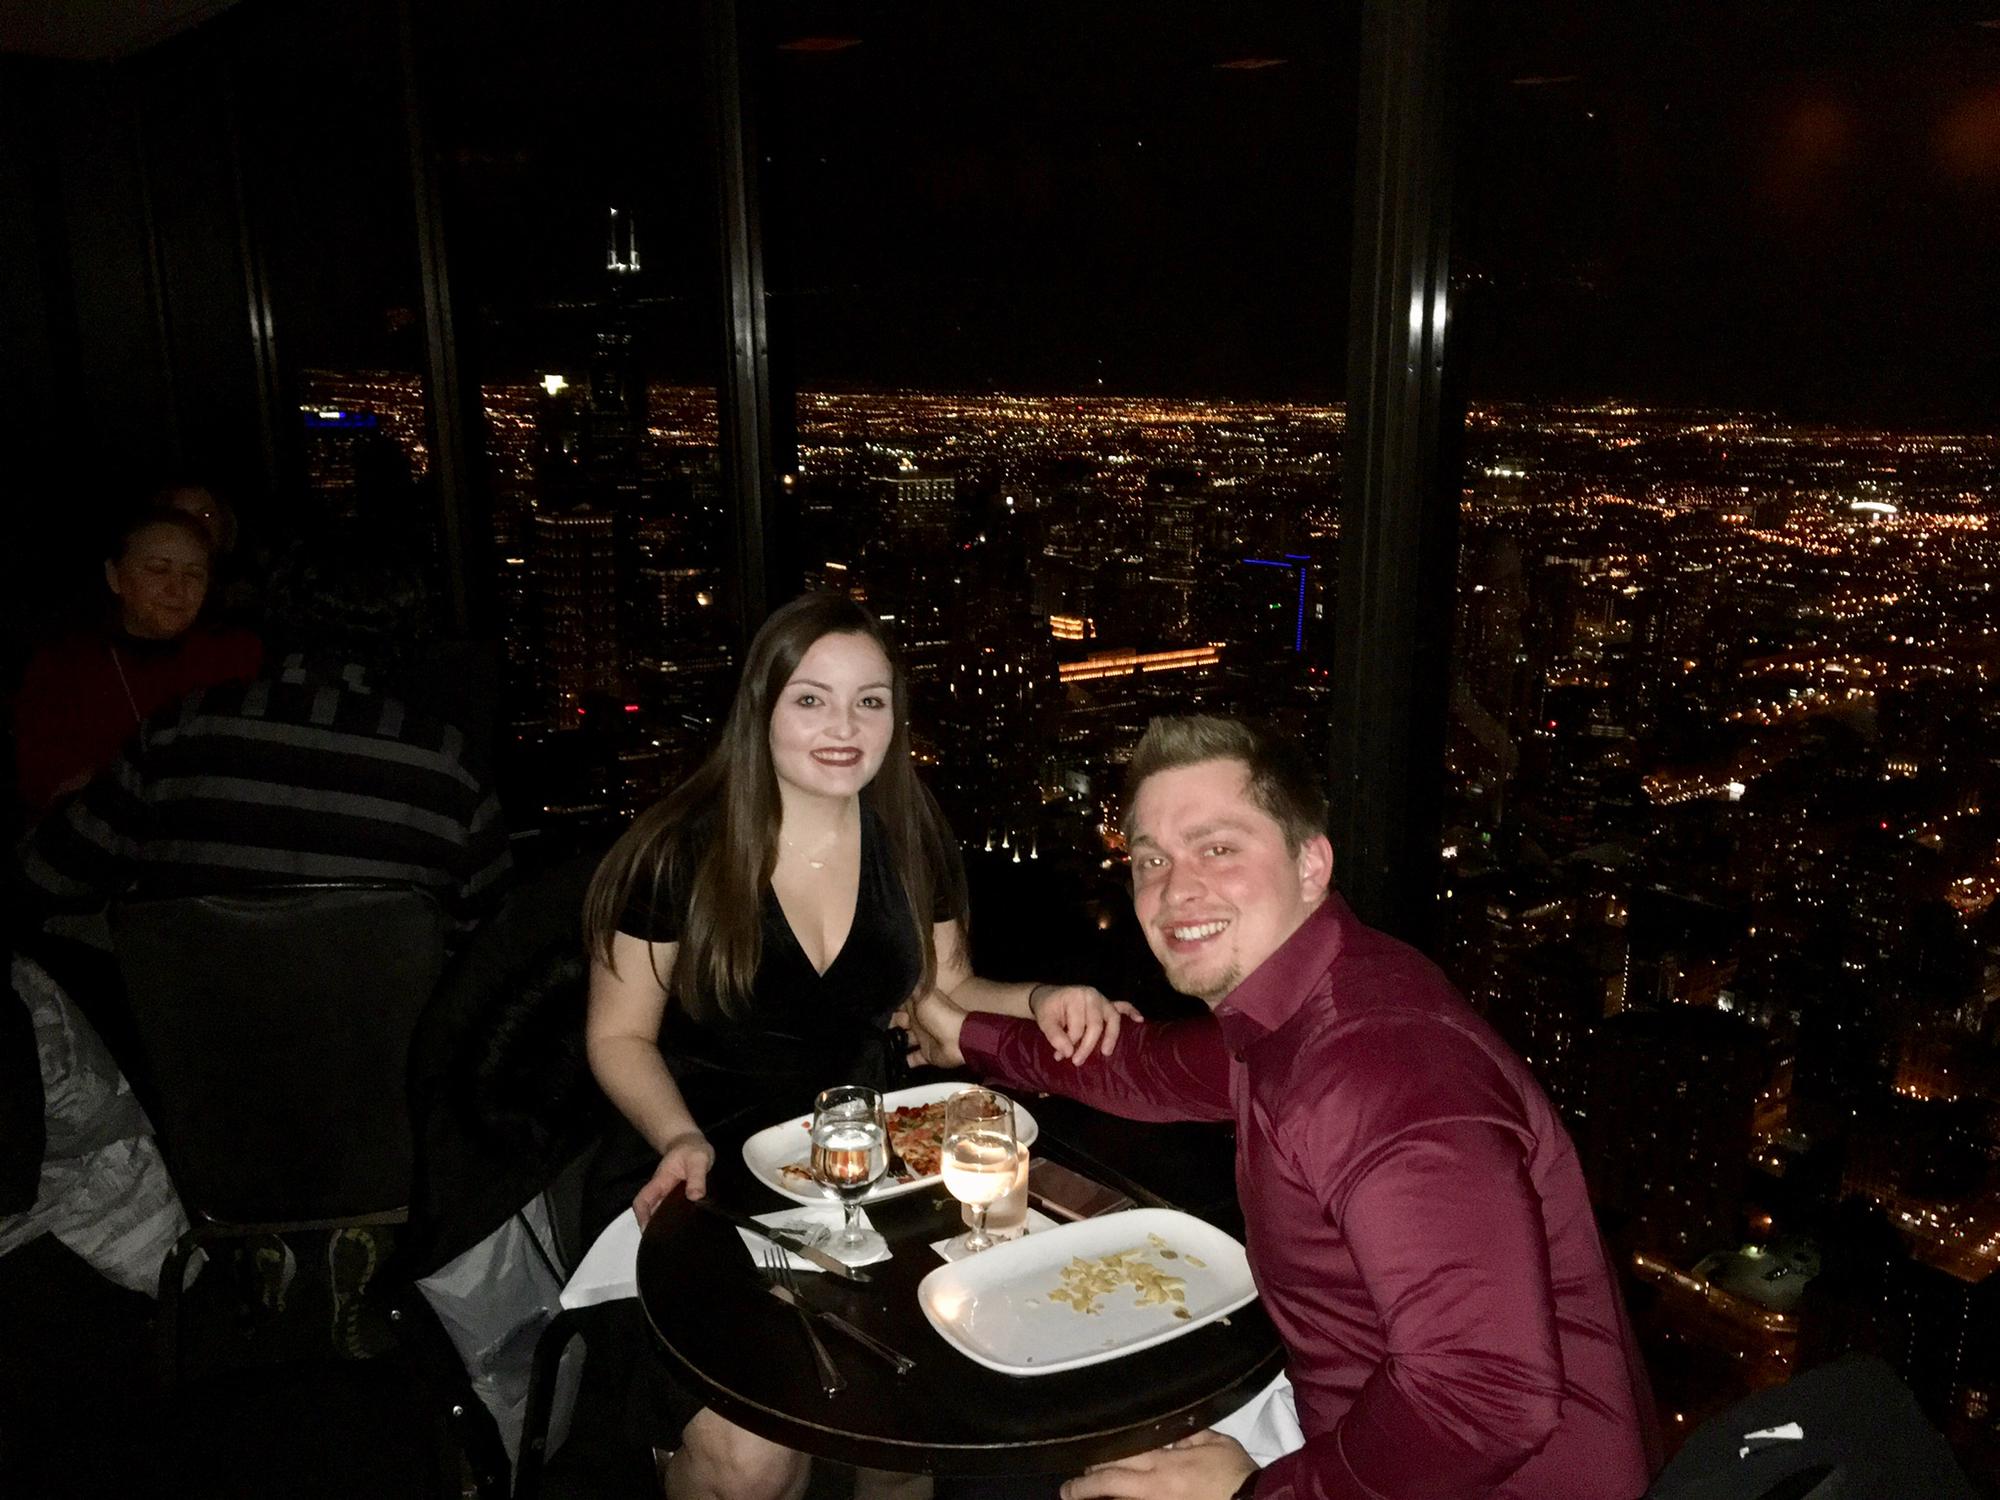 Our second anniversary trip to the signature room downtown Chicago.